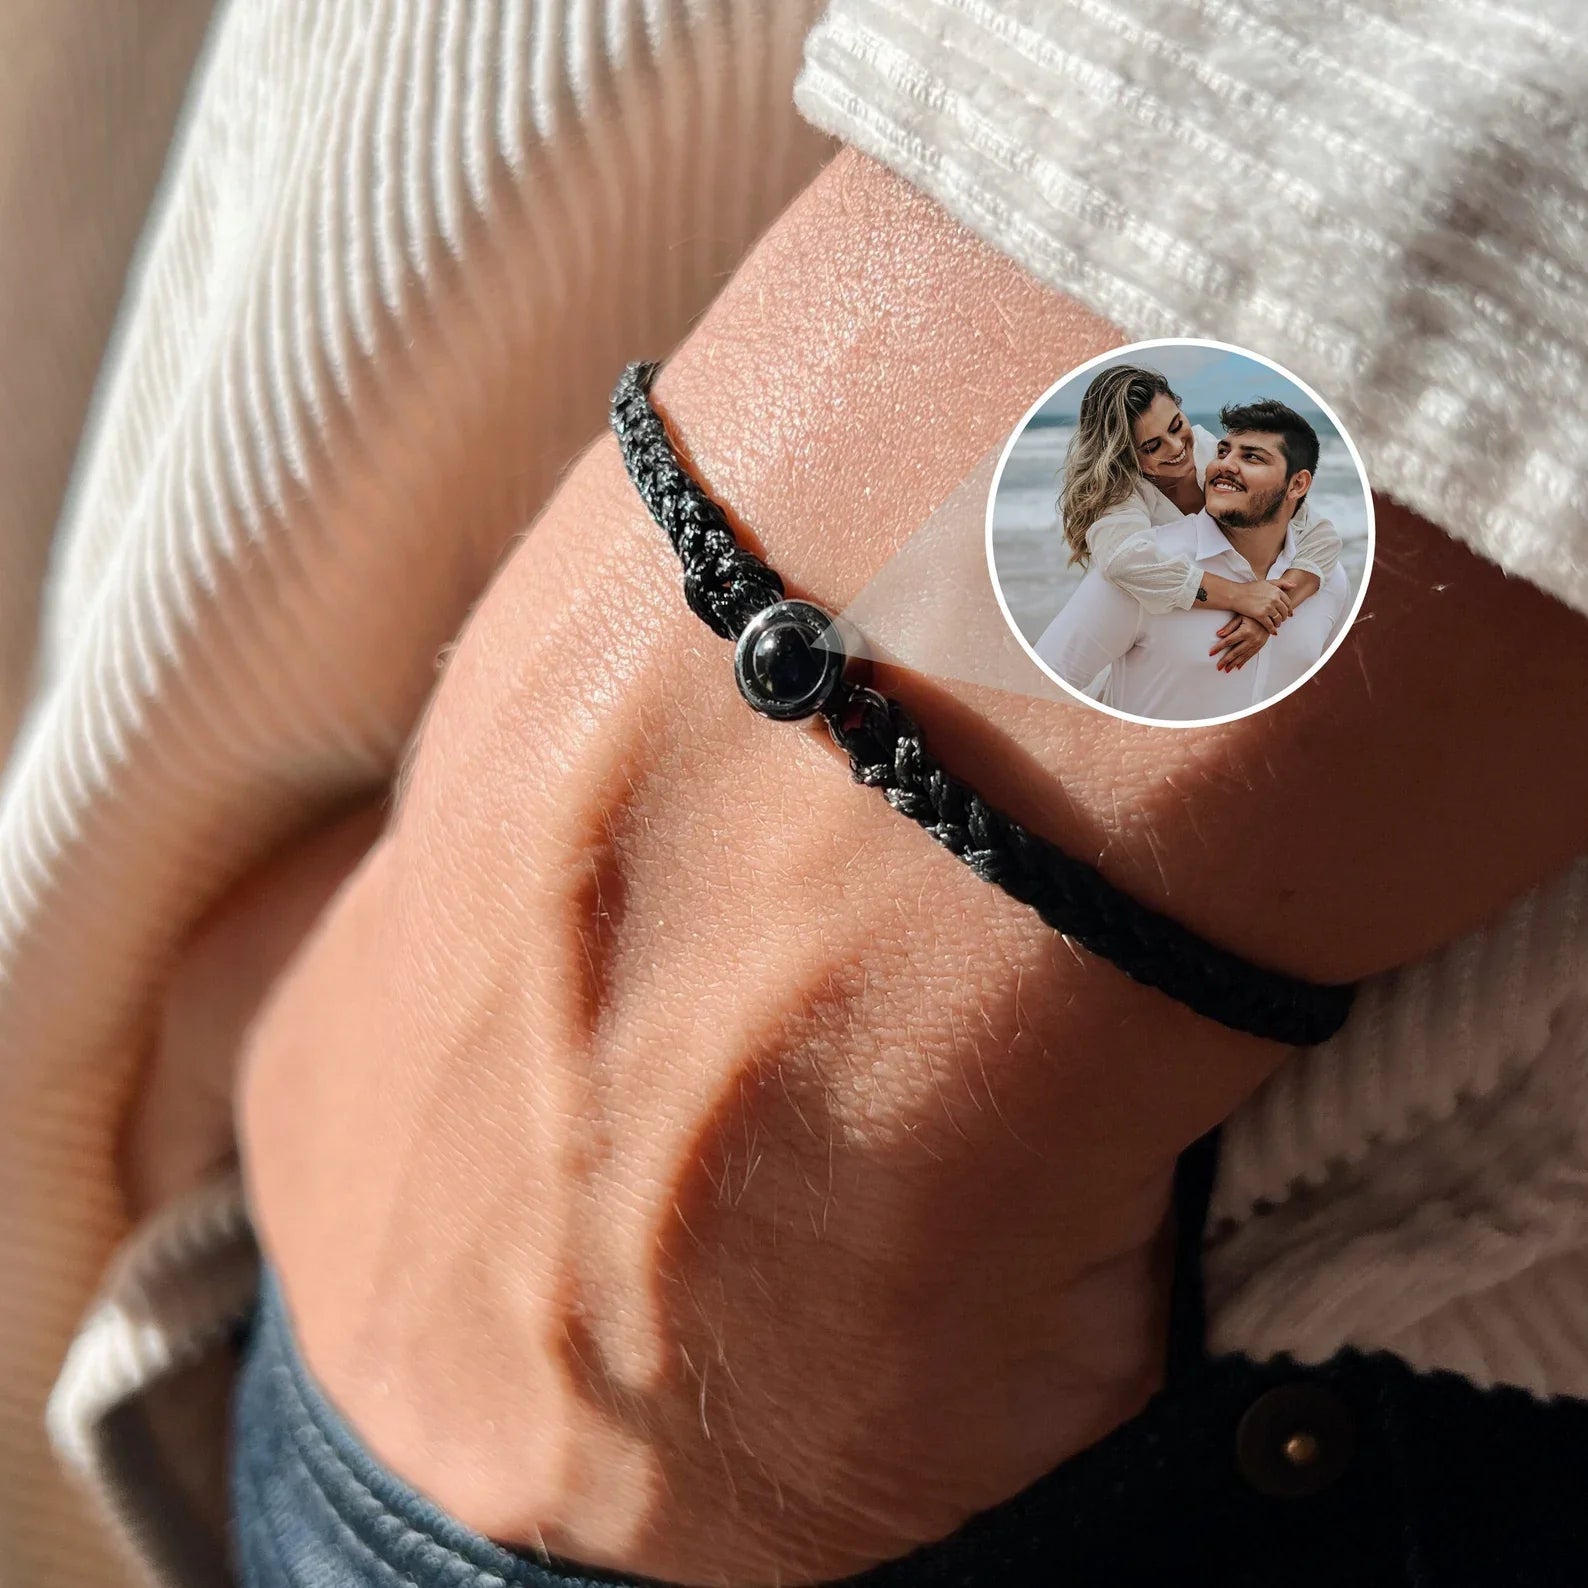  Customized Picture Bracelets For Women, Custom Black Bracelet  With Pictures, Personalized Heart Locket Cable Link Bracelet, Photo Bracelet  For Women Picture Locket Bracelet Of Loved One